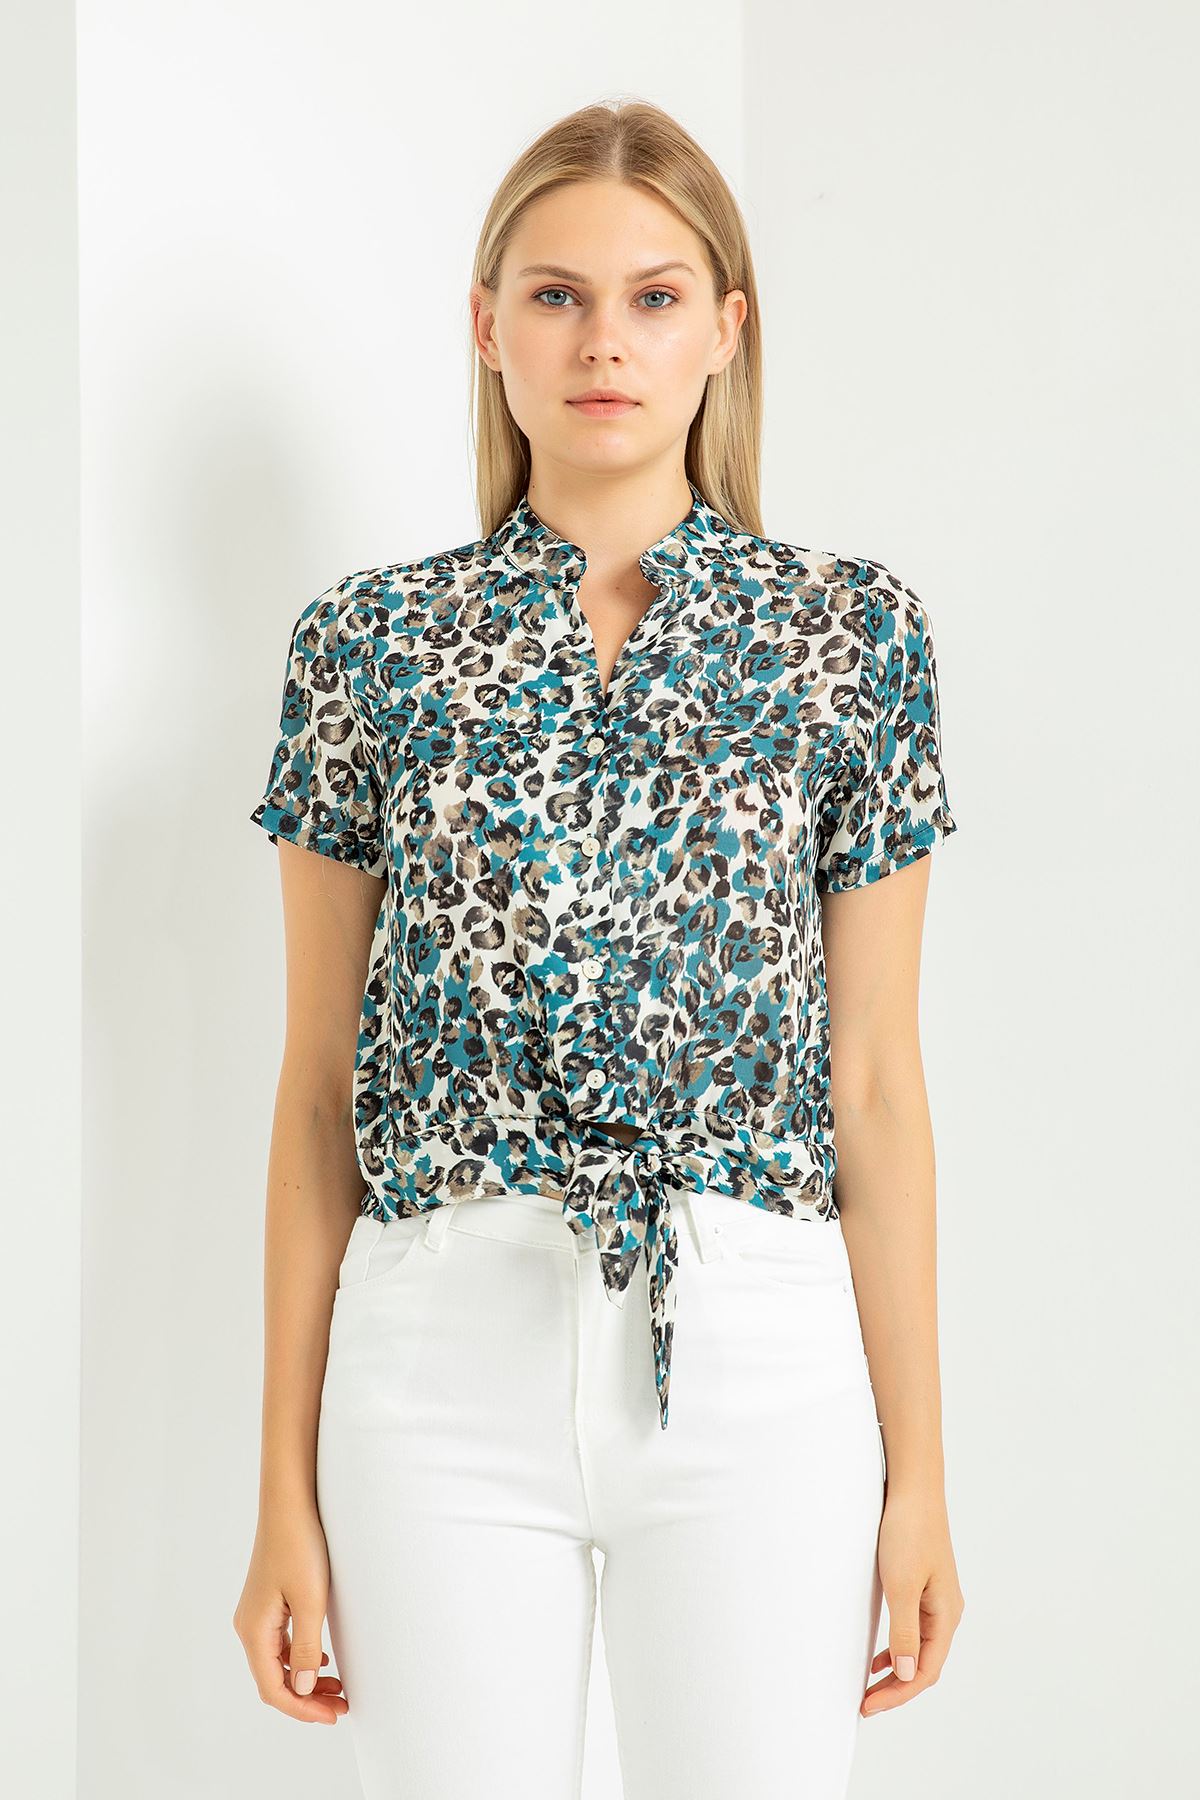 Jessica Blouse Short Sleeve Shirt Collar Leopard Print With Tie Front Blouse - Oil color